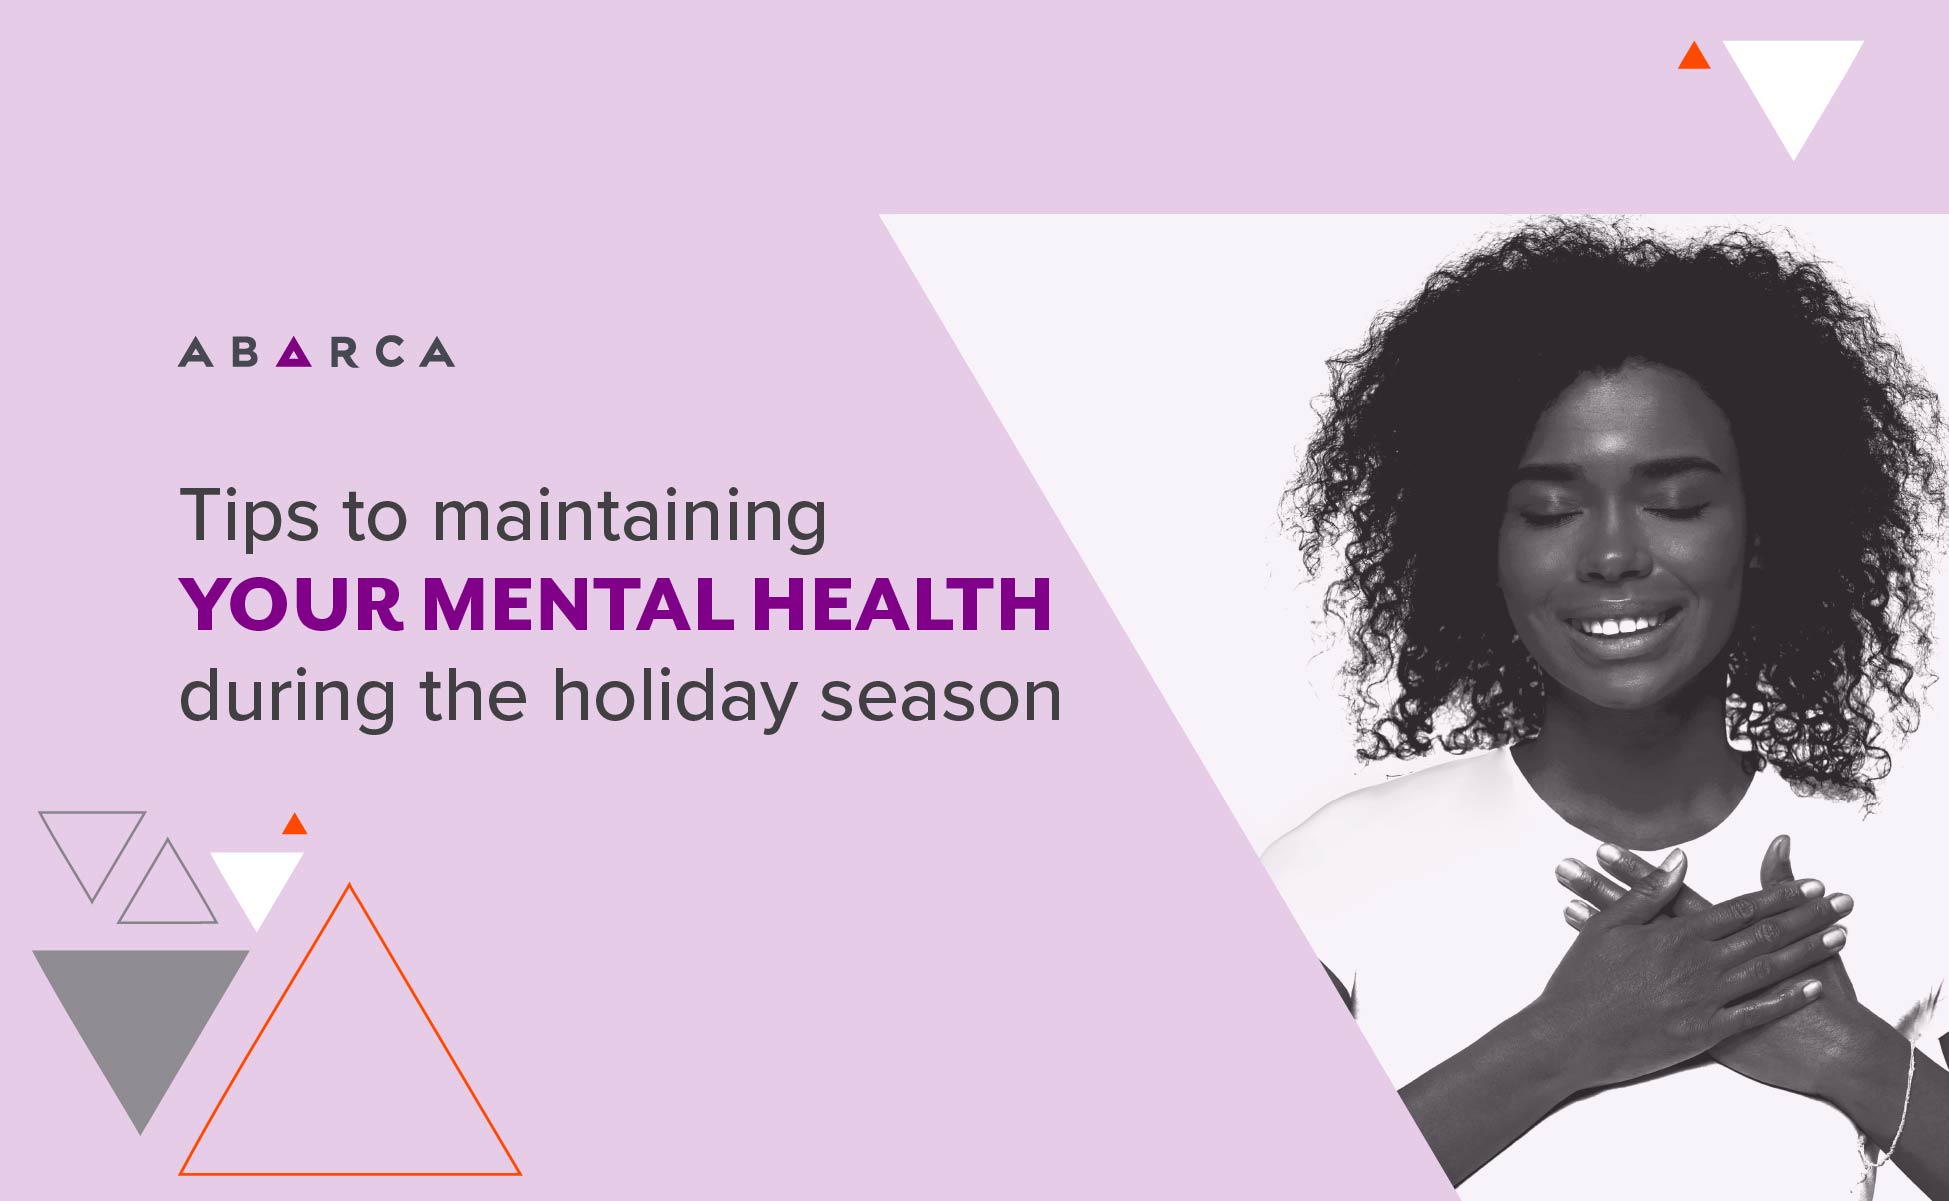 Abarca Health: Being mindful of mental health during the holiday season